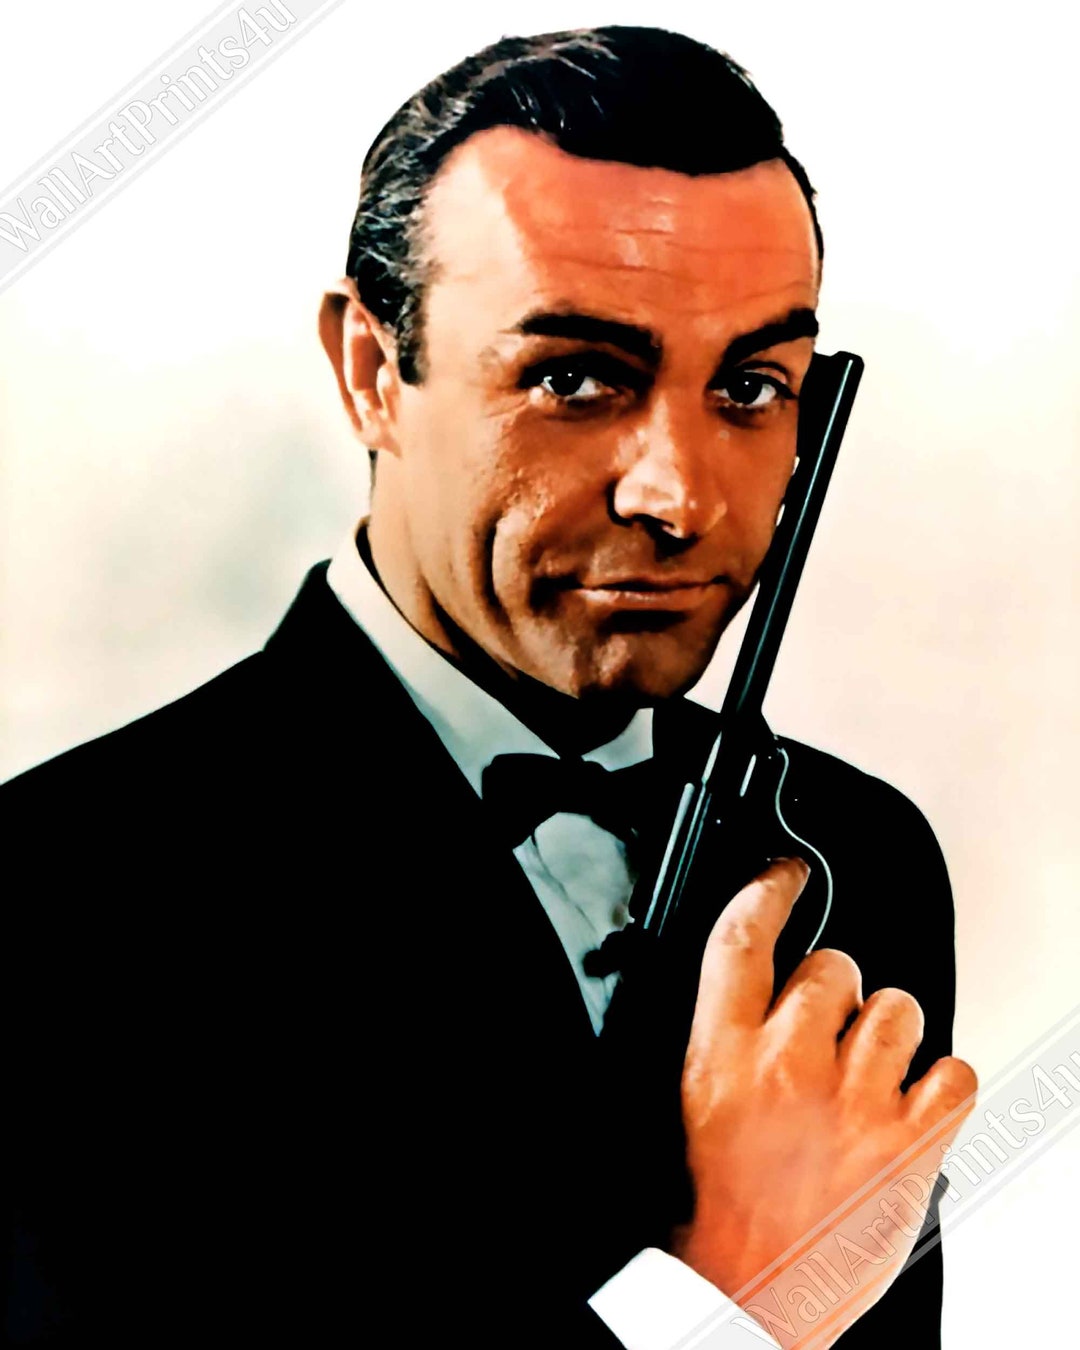 James Bond Poster Sean Connery Handsome Actor Vintage Photo - Etsy